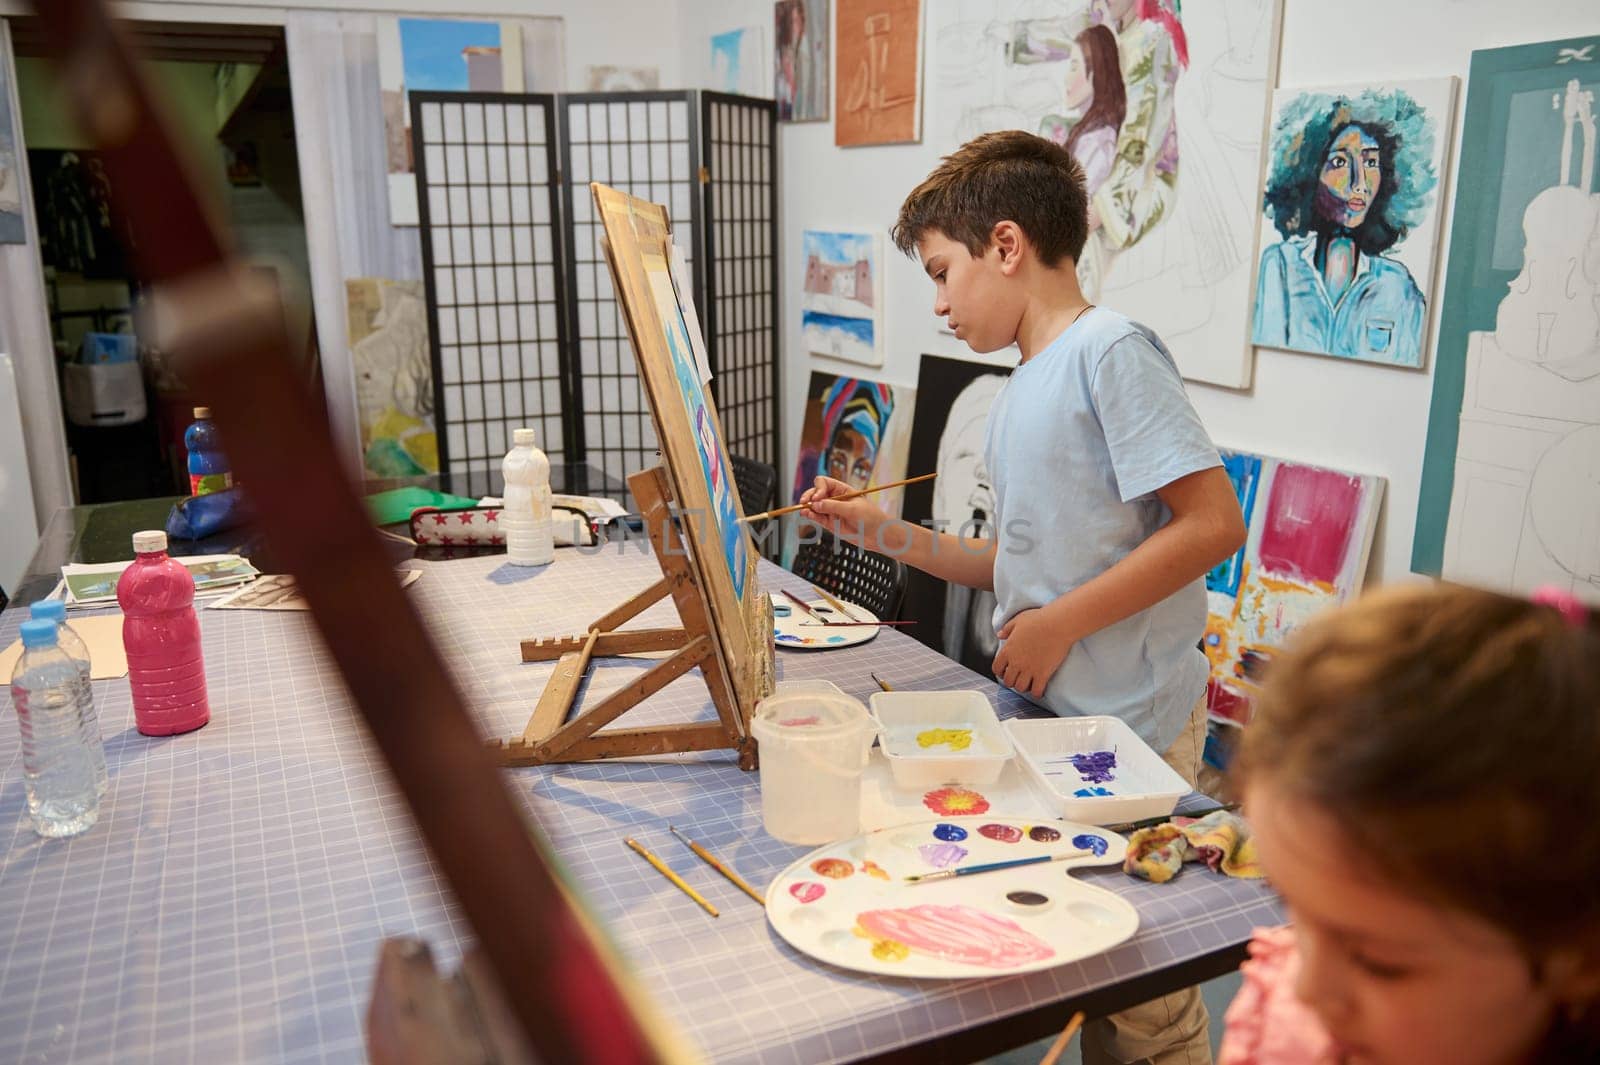 Talented elementary age kids, confident focused teen boy and girl, inspired artists painters standing by wooden easel and painting with watercolors on canvas, learning art in a cozy creative workshop